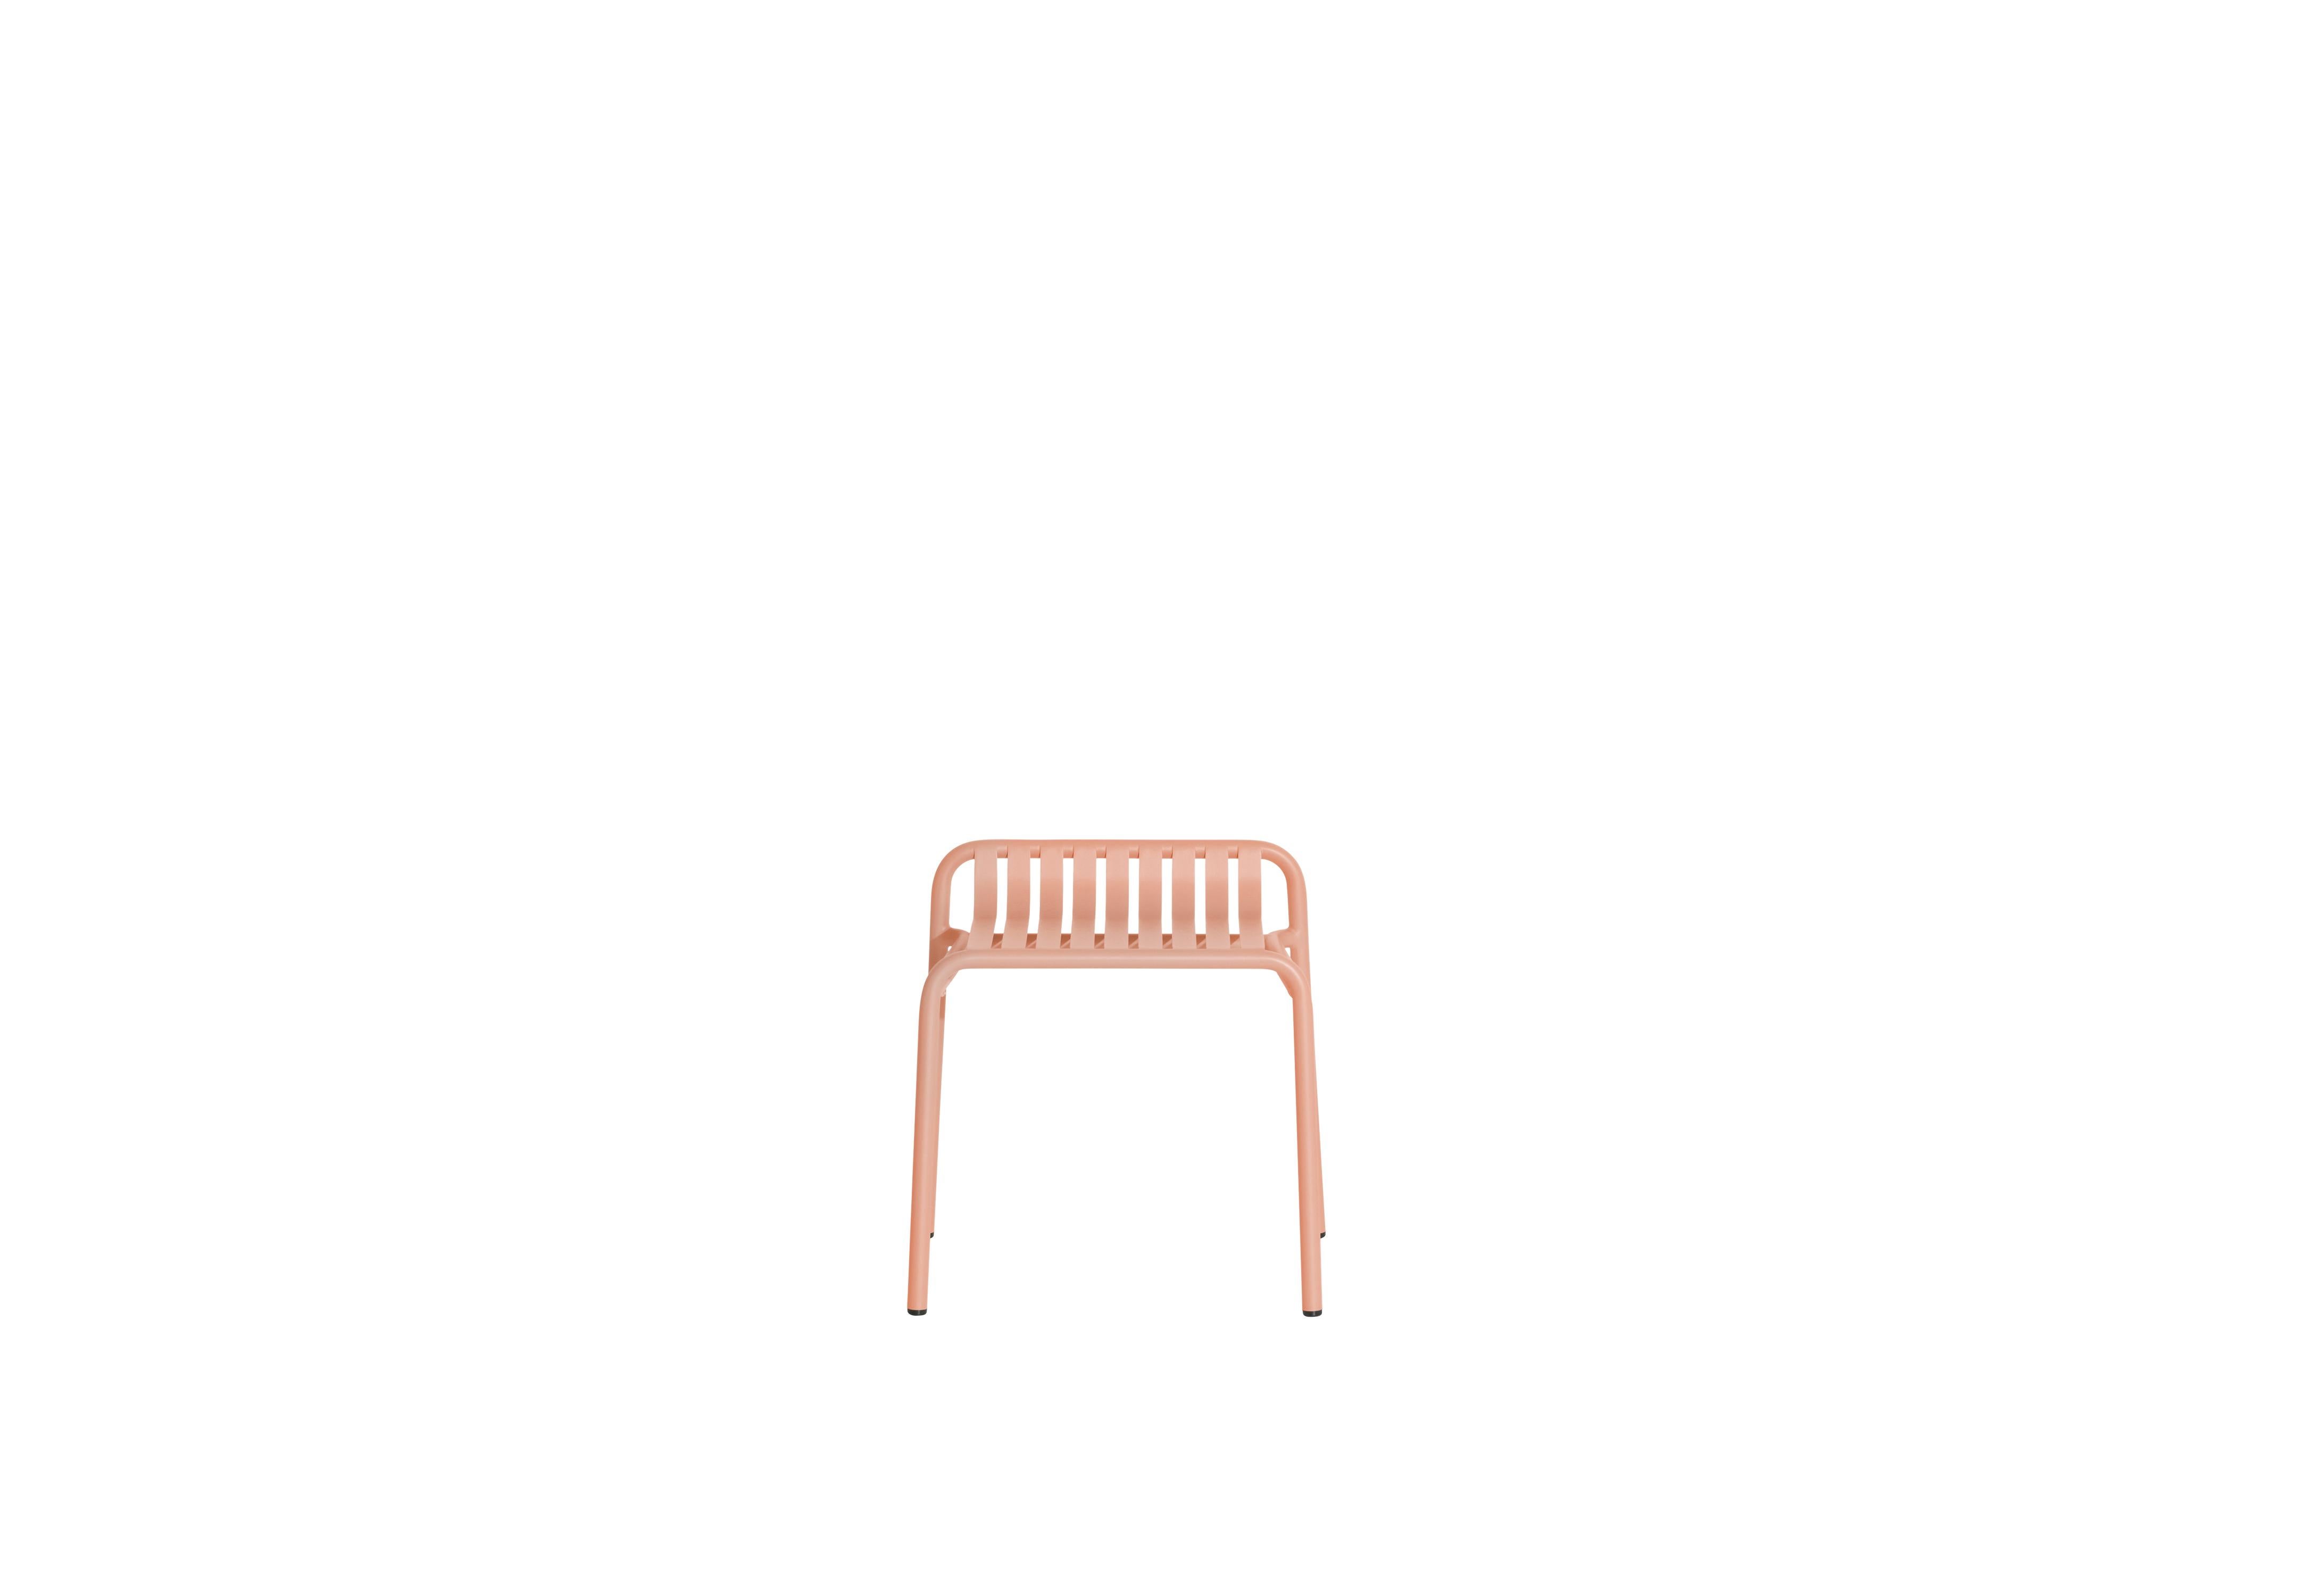 Petite Friture Week-End Stool in Blush Aluminium by Studio BrichetZiegler, 2017

The week-end collection is a full range of outdoor furniture, in aluminium grained epoxy paint, matt finish, that includes 18 functions and 8 colours for the retail